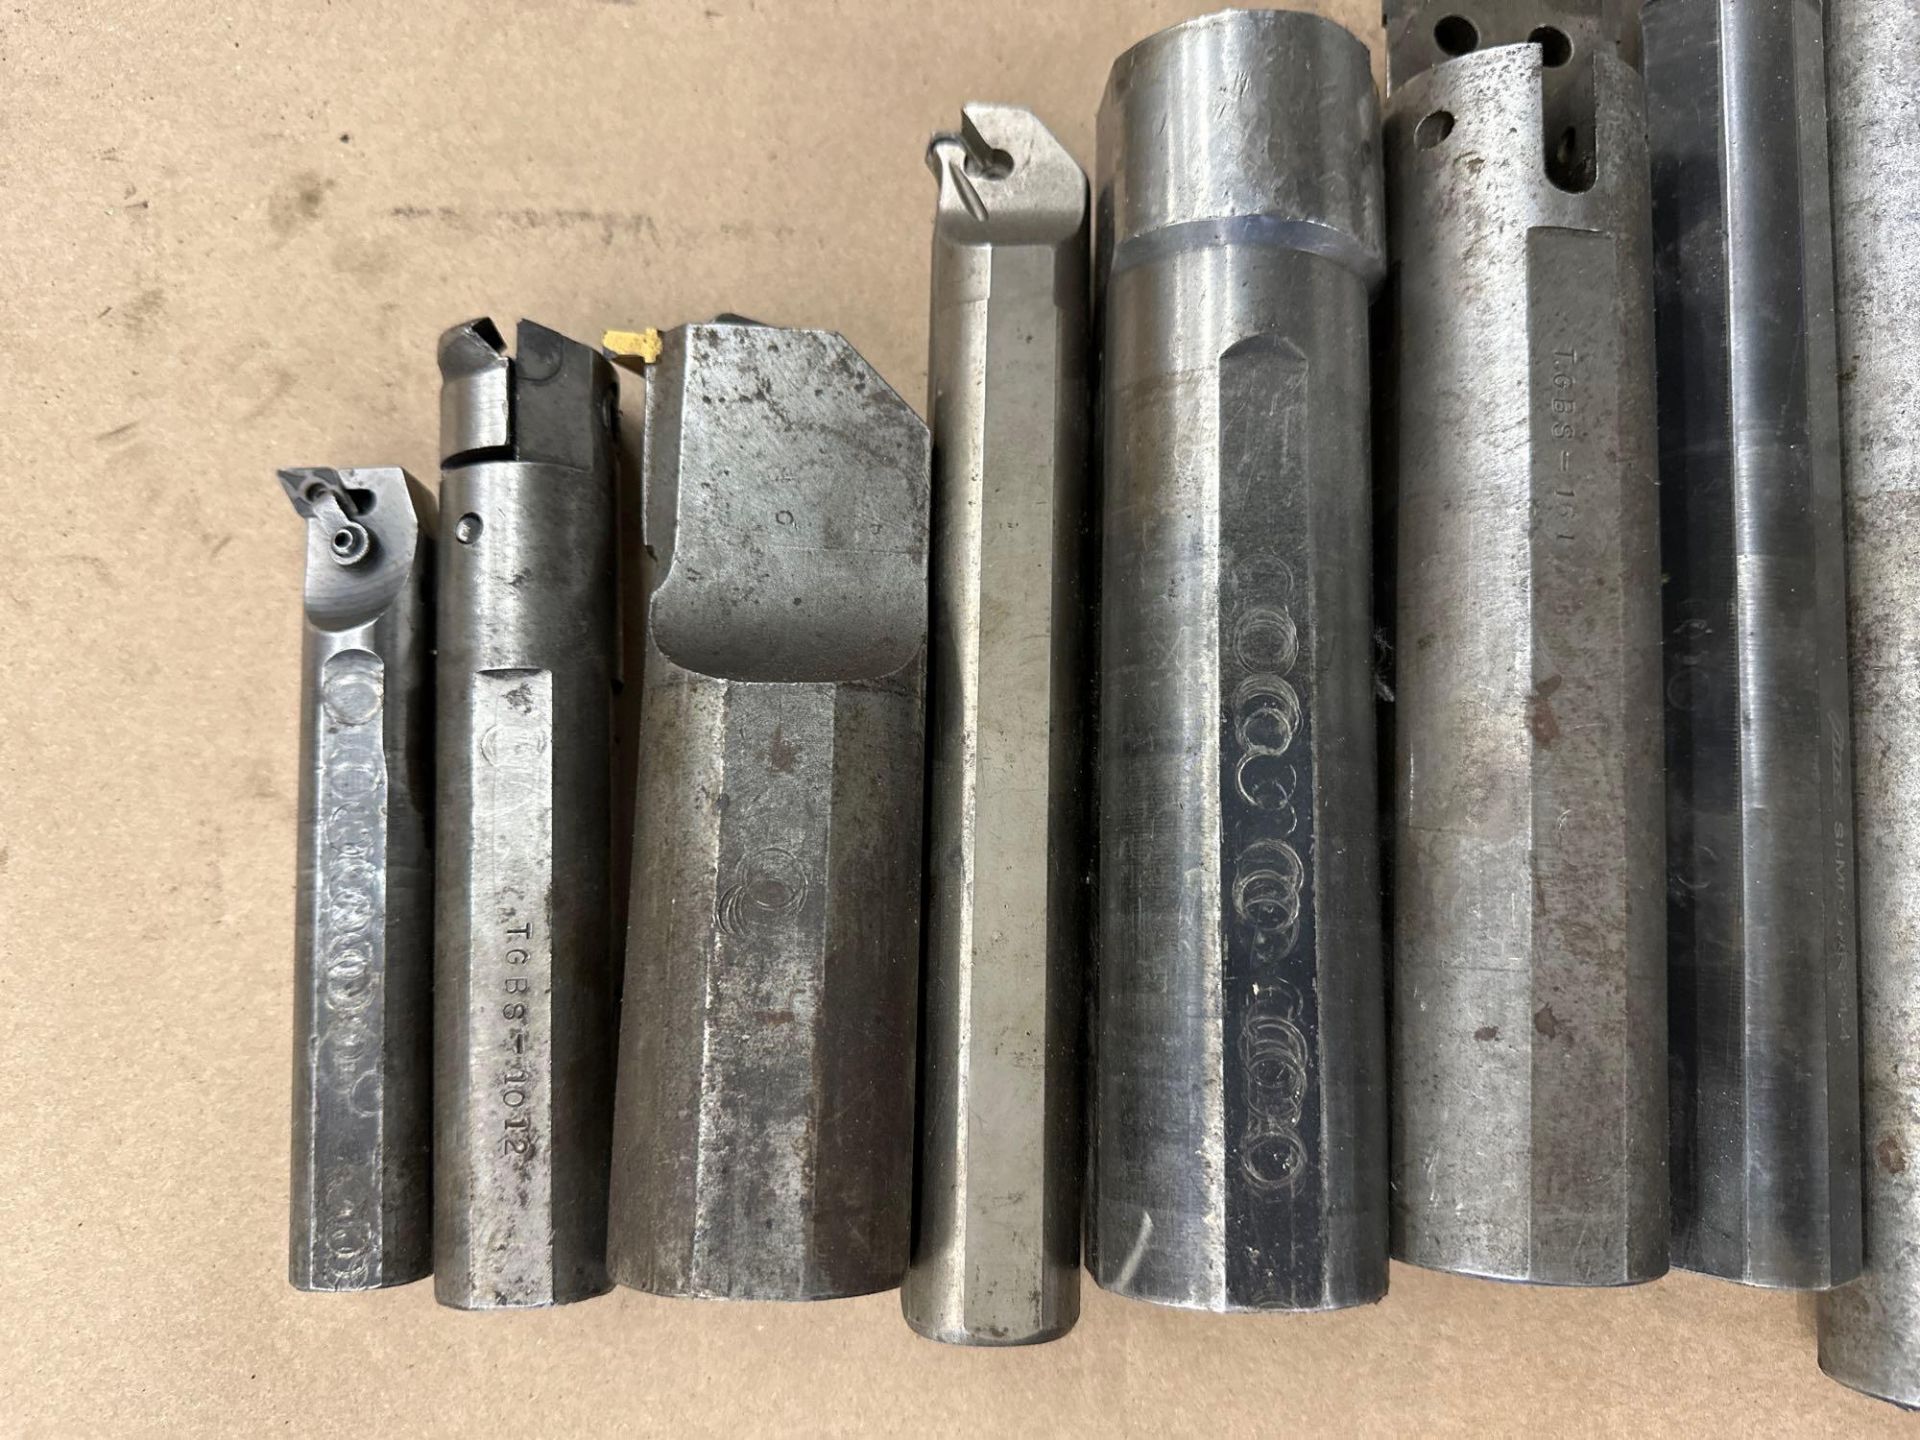 Lot of 10 Assorted Indexable Boring Bars Ranging From: 1” X 5 1/2” To 2 1/2” X 19 3/4” - Image 5 of 6